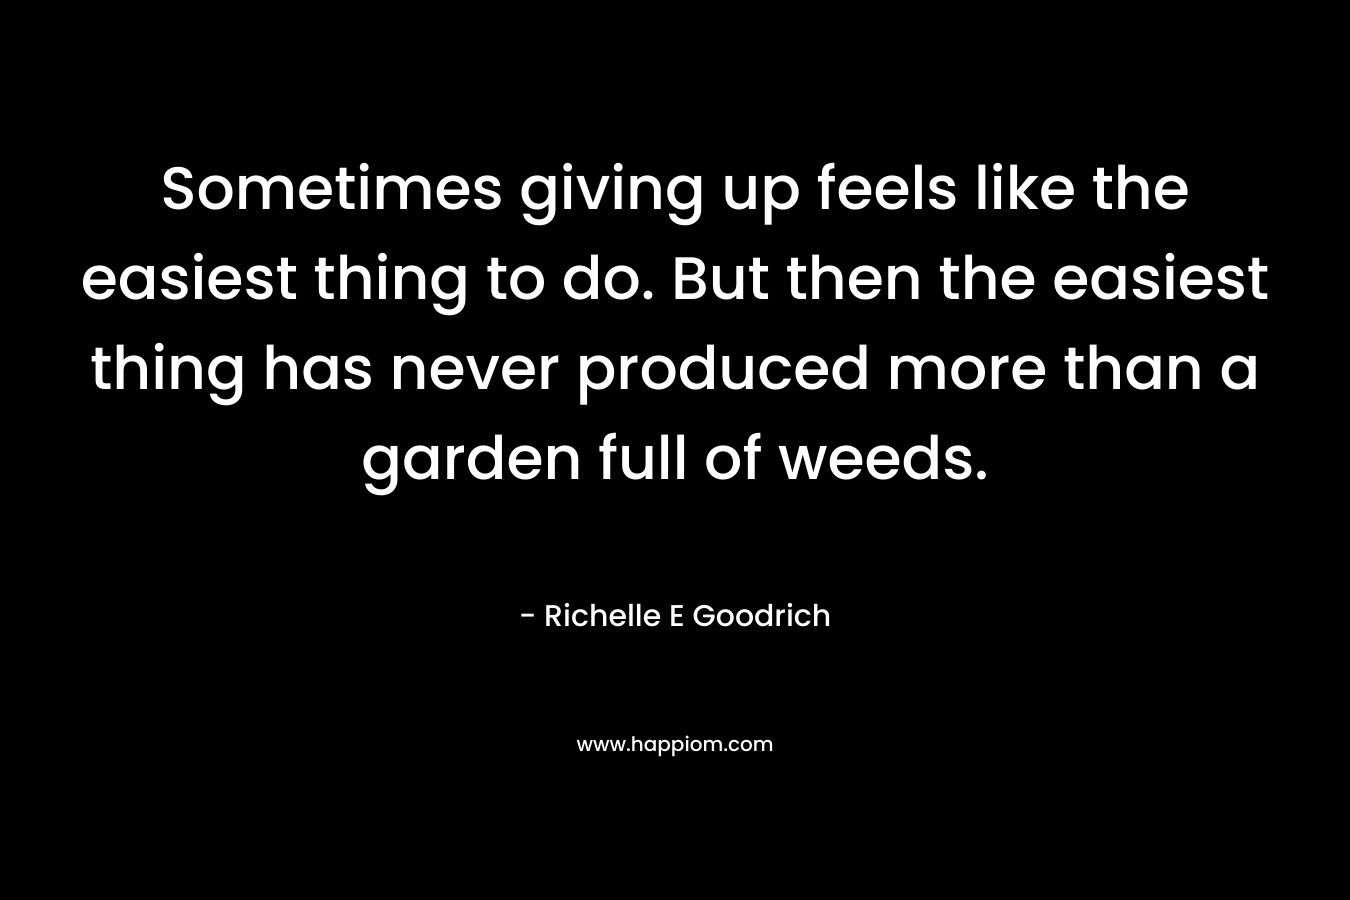 Sometimes giving up feels like the easiest thing to do. But then the easiest thing has never produced more than a garden full of weeds.